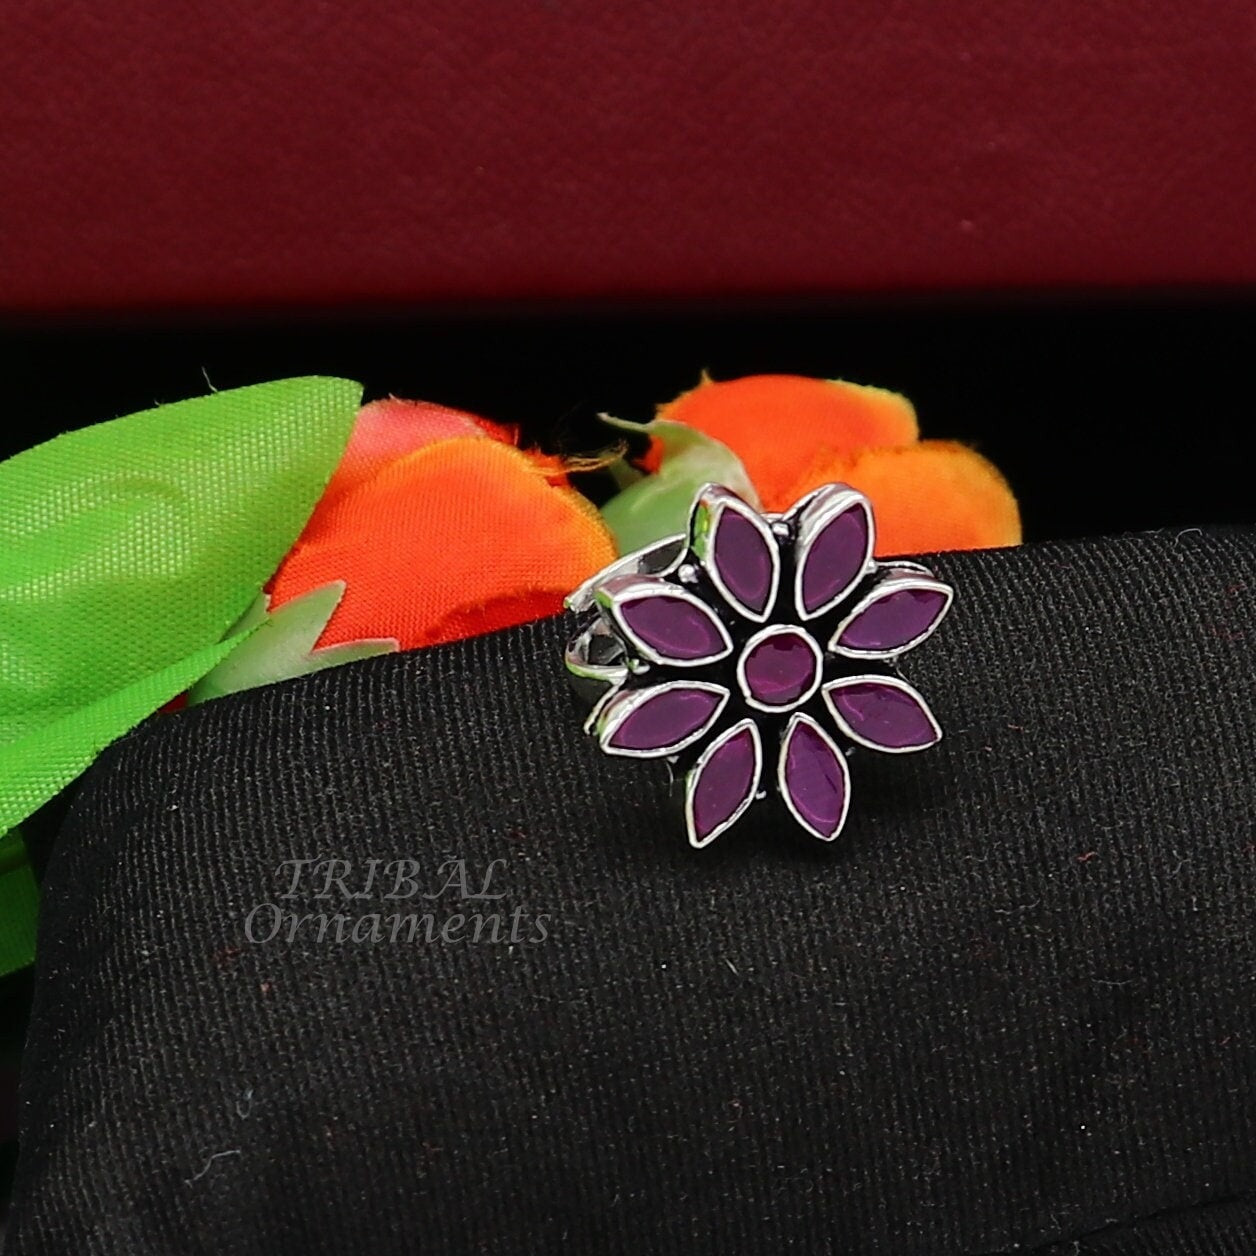 925 sterling silver handmade cut stone purple red flower design ring adjustable for all sizes best girl's gifting fashionable ring sr349 - TRIBAL ORNAMENTS